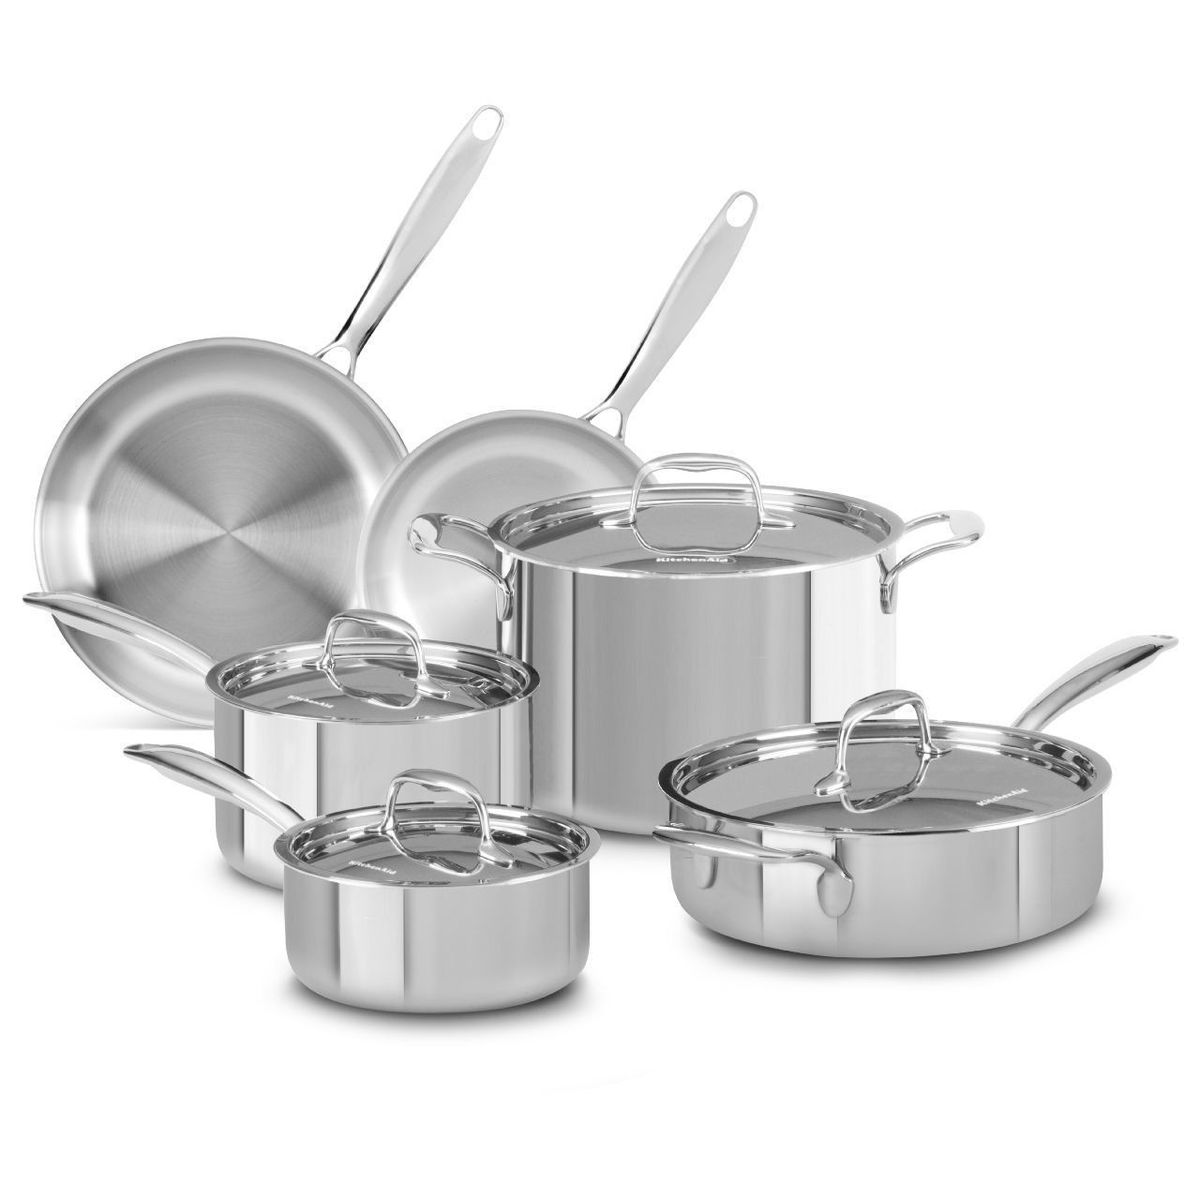 Tri-ply Cookware v/s Stainless Steel Cookware - Which is better?